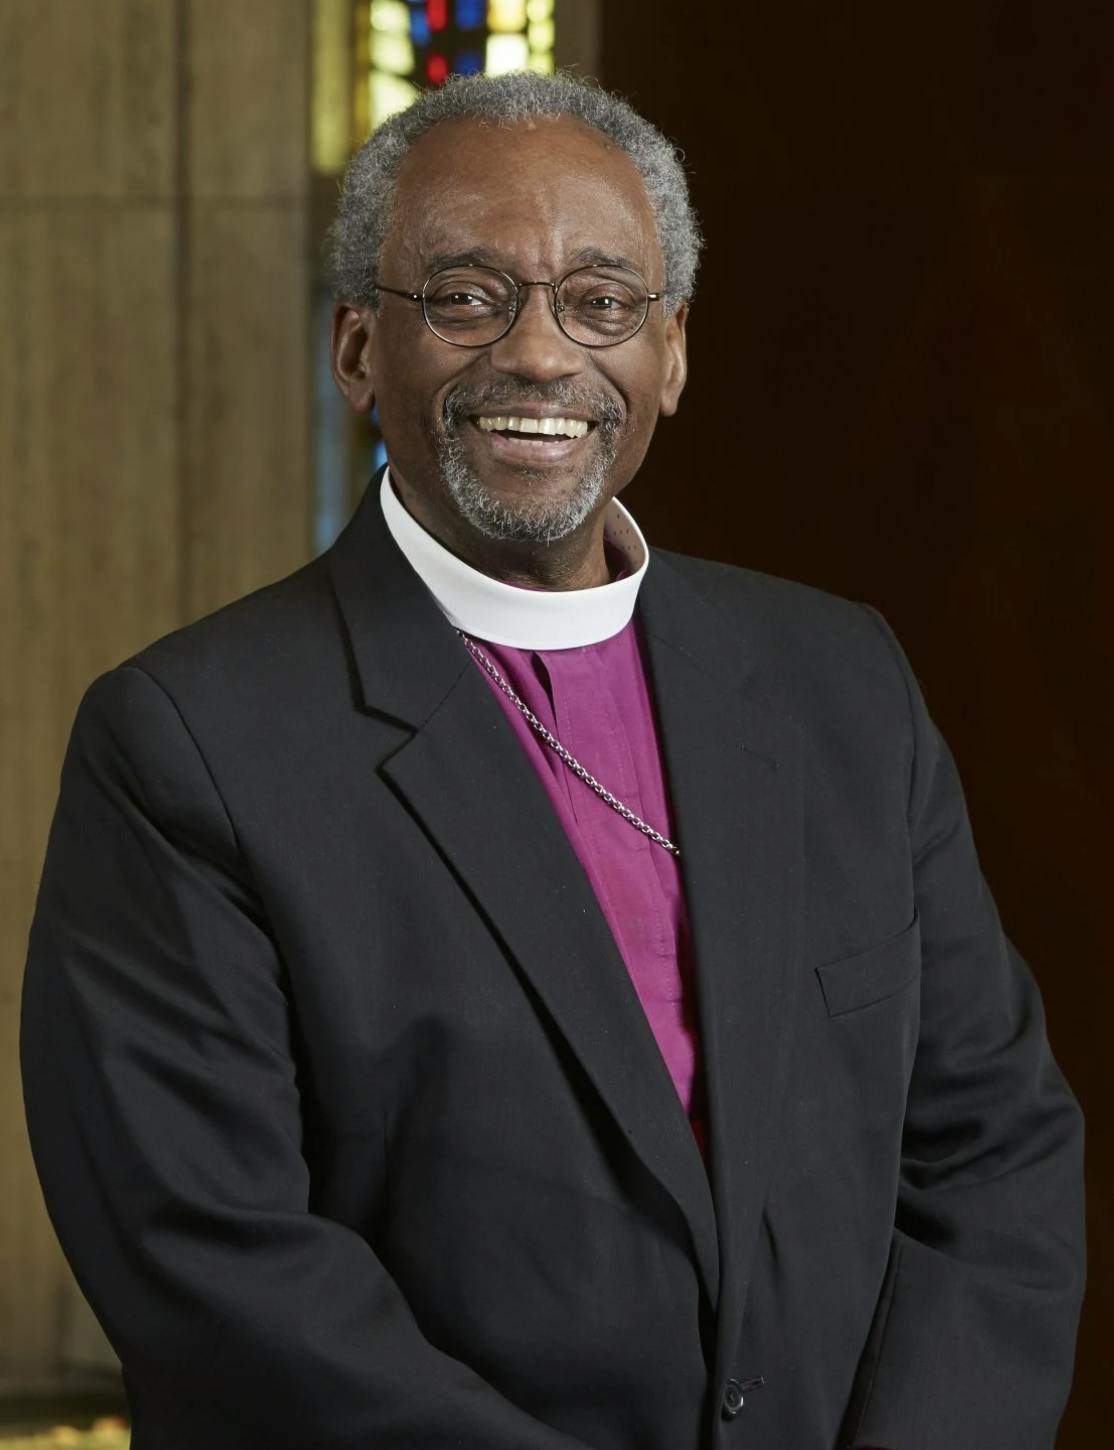 Goodness Triumphs Through Good People: A Year-End Benediction from Bishop Michael Curry